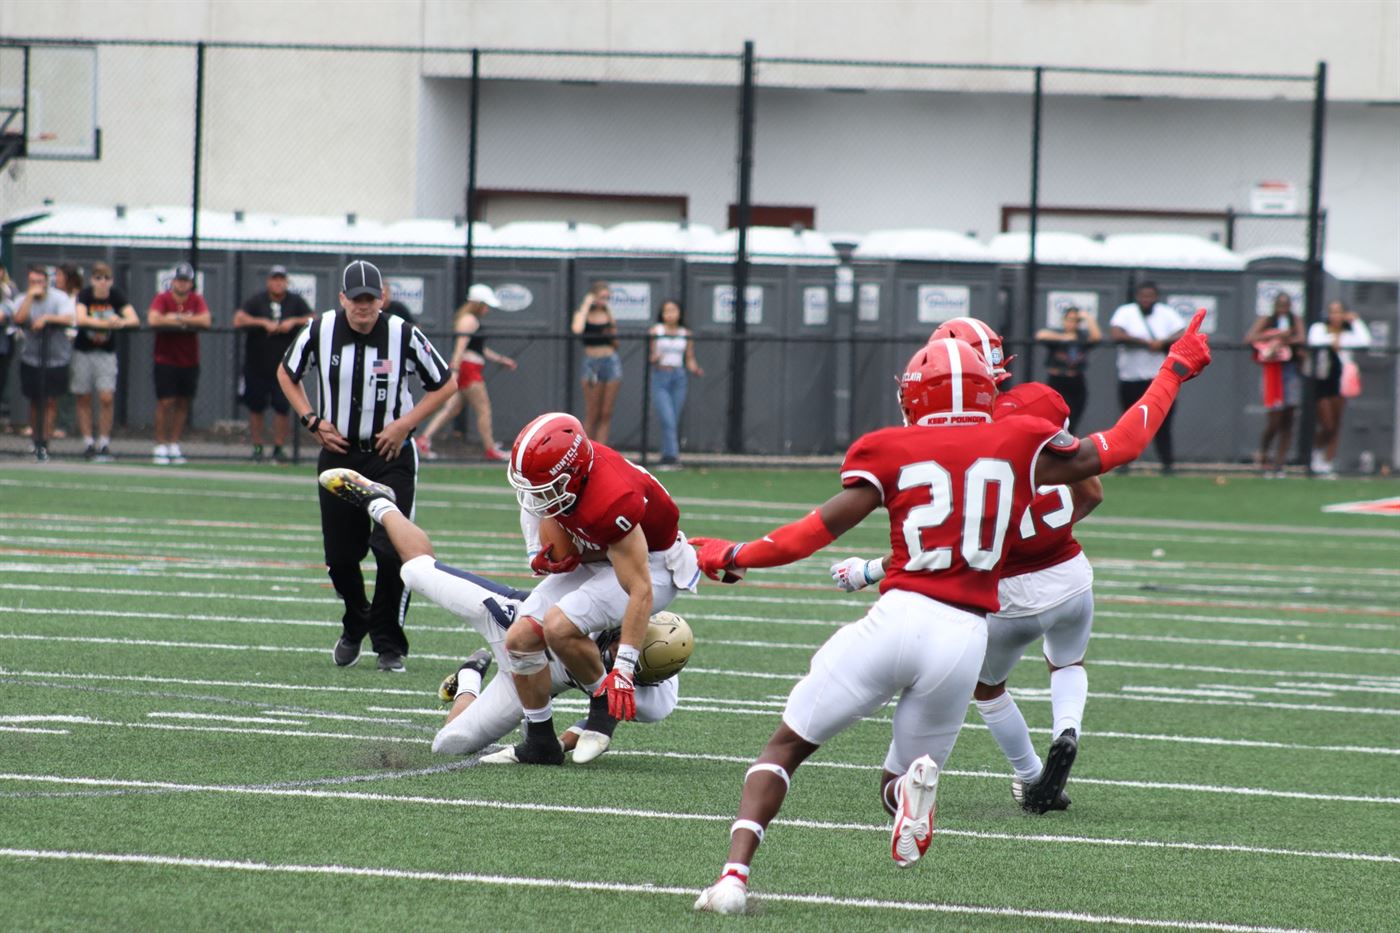 In his fifth year with the Red Hawks, Mike Ramos is already pulling off spectacular interceptions. Trevor Giesberg | The Montclarion